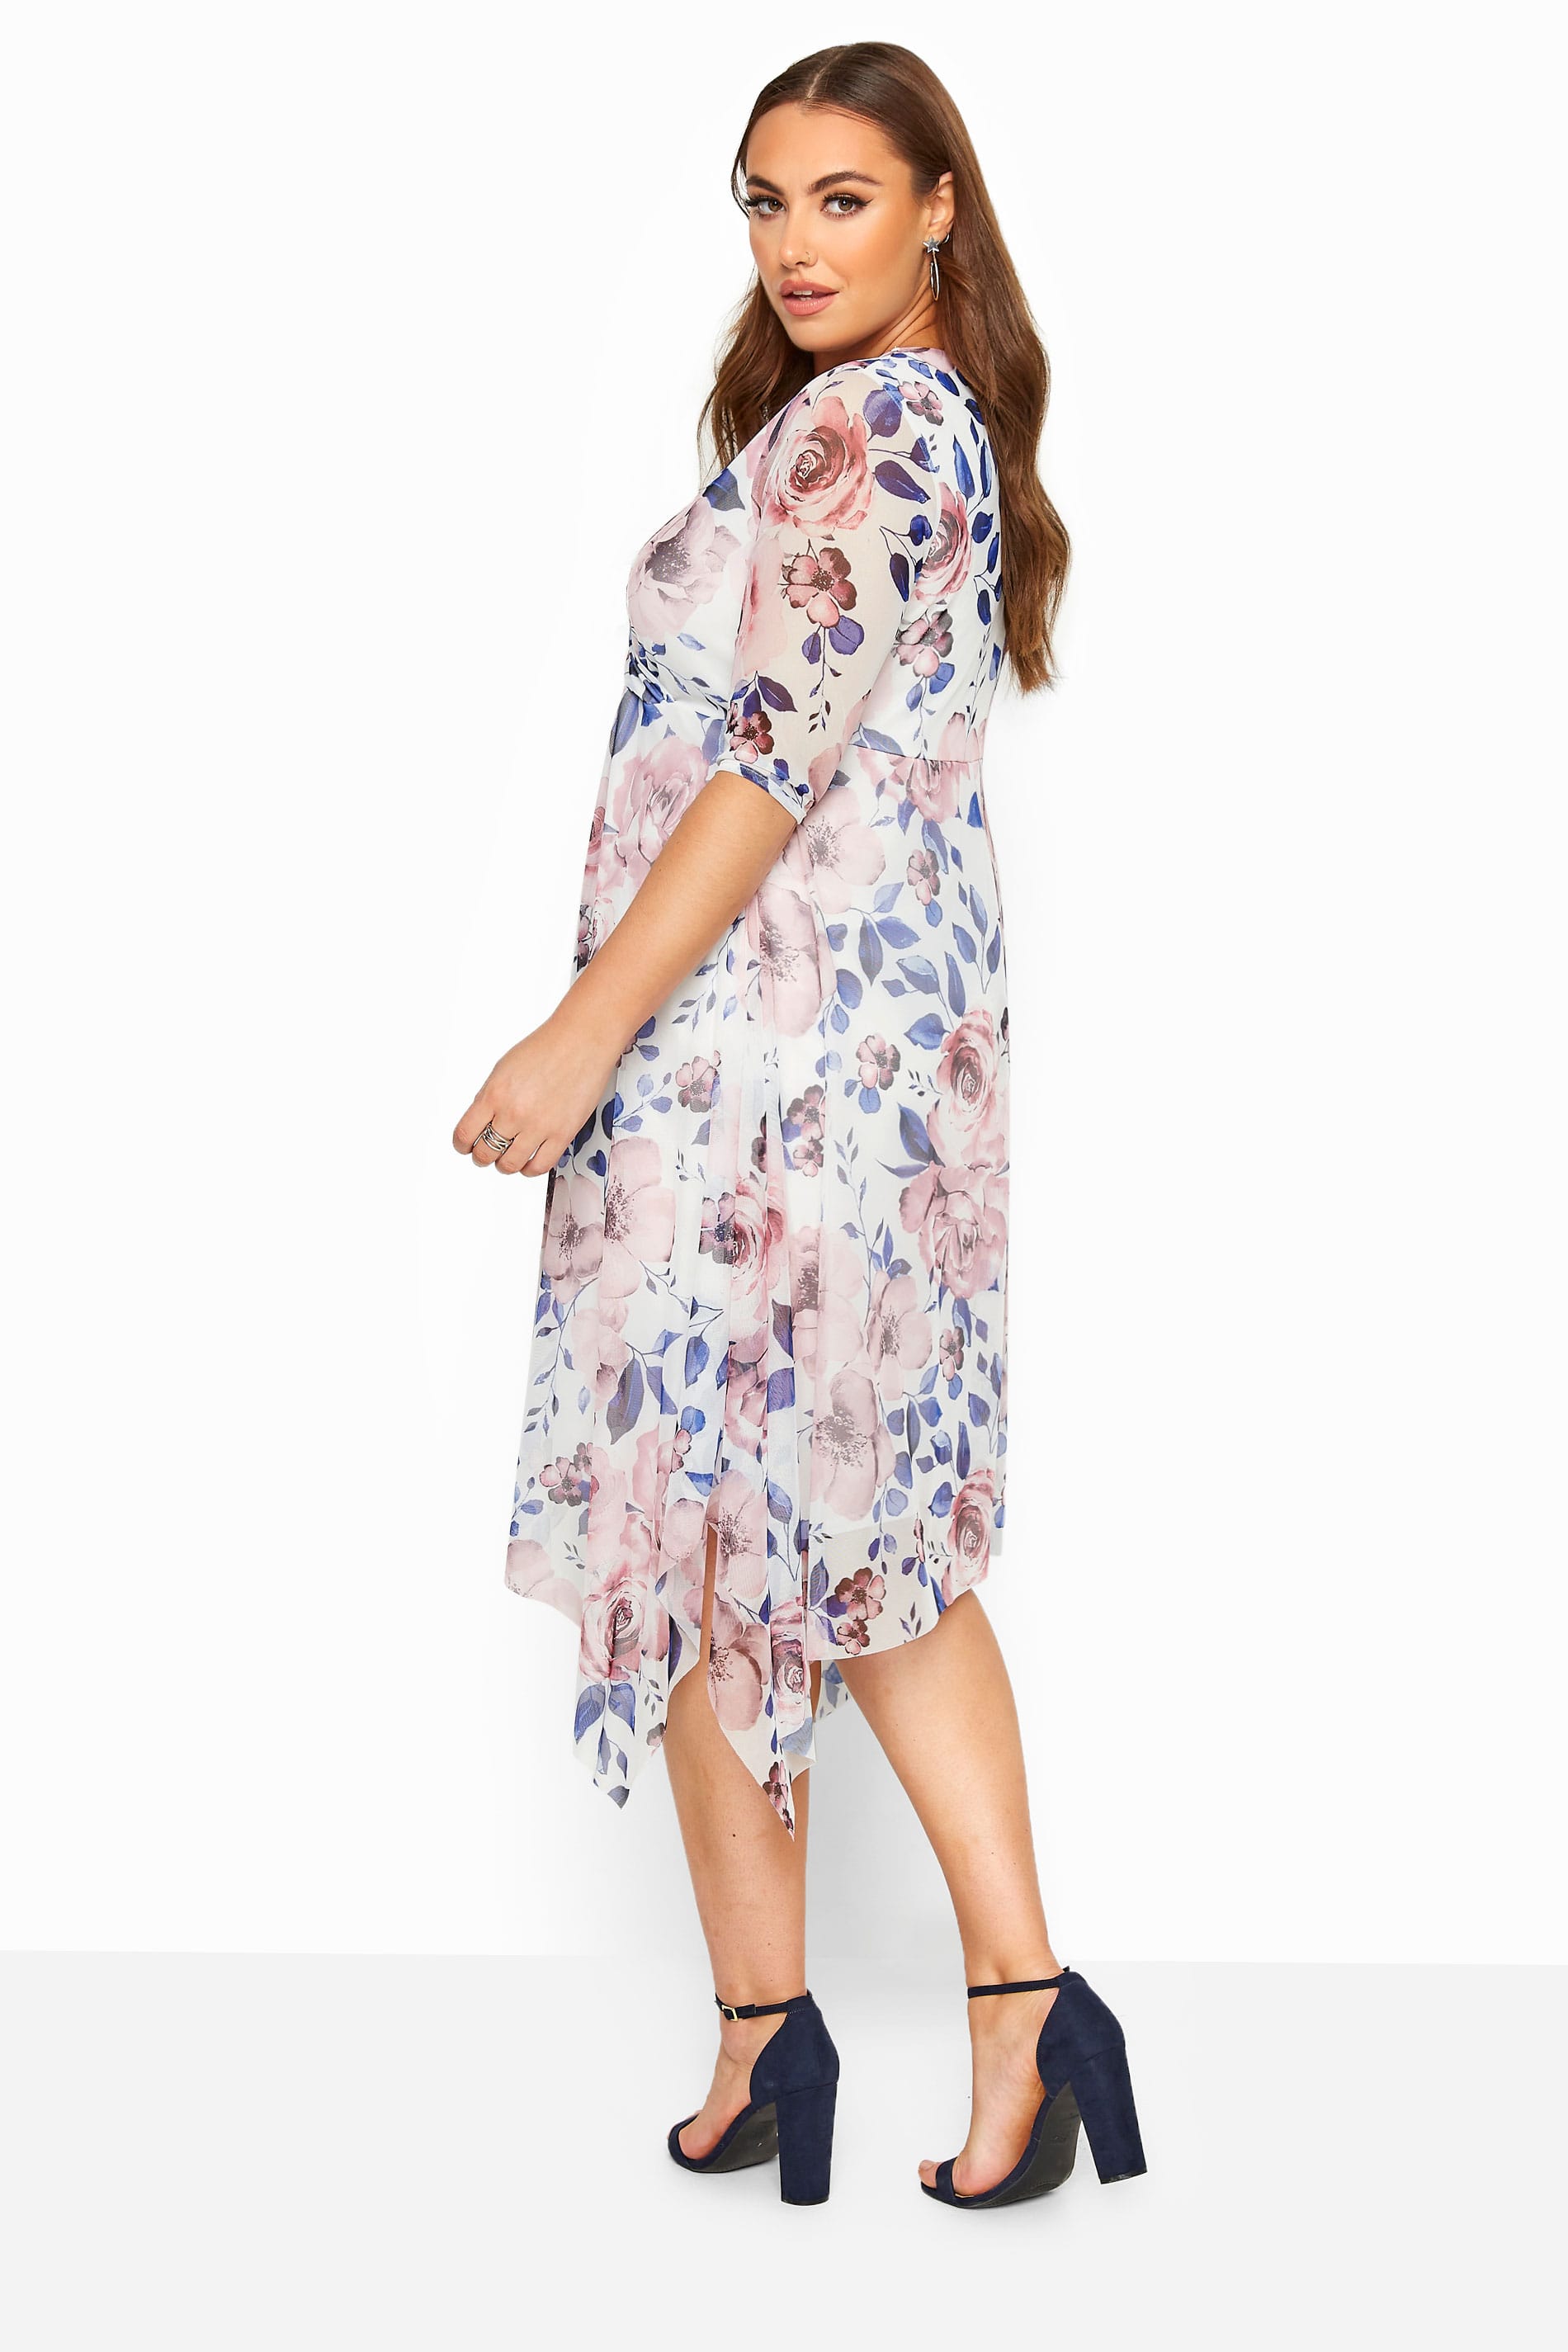 YOURS LONDON White Floral Print Mesh Wrap Dress | Yours Clothing